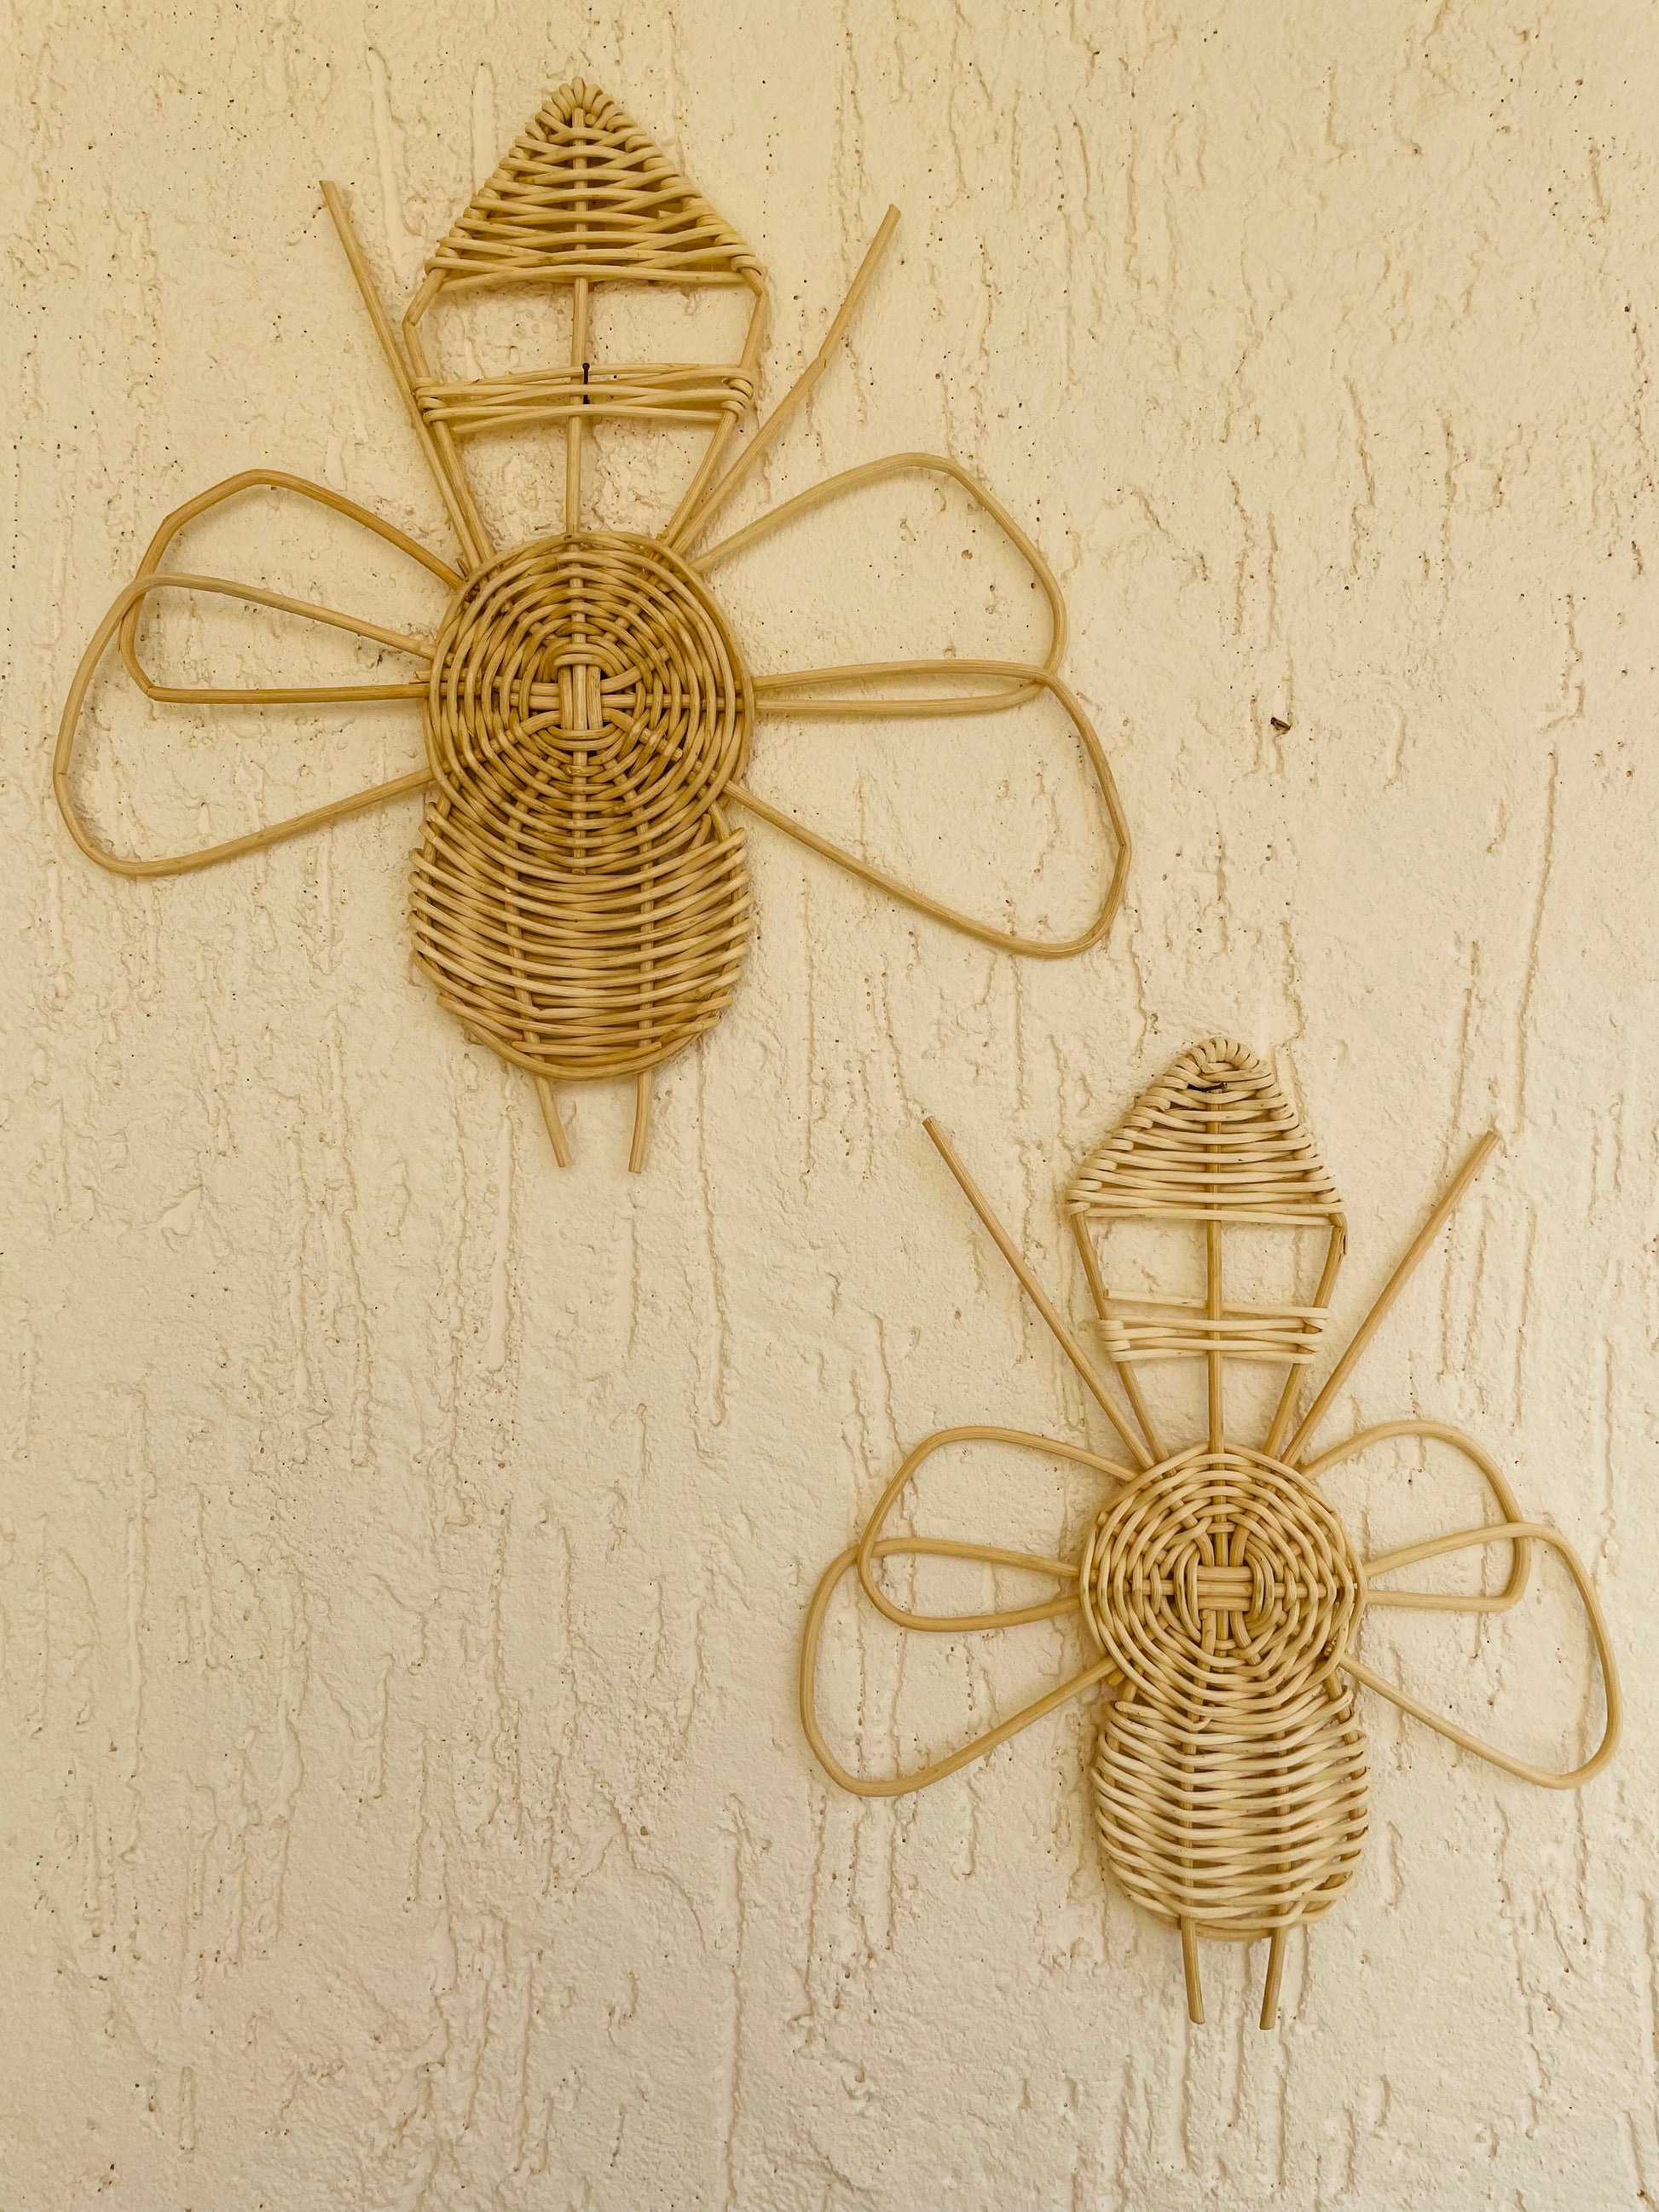  Bees cane wall décor, Bohemian wall art, Cafe wall decorations, Children's room décor, Entryway wall décor, Floral wall art, Handcrafted wall décor, Home decor accents, Iron frame wall art, Living room wall art, Restaurant wall art, Rustic wall décor, Set of 2 wall art, Unique wall décor, tesu